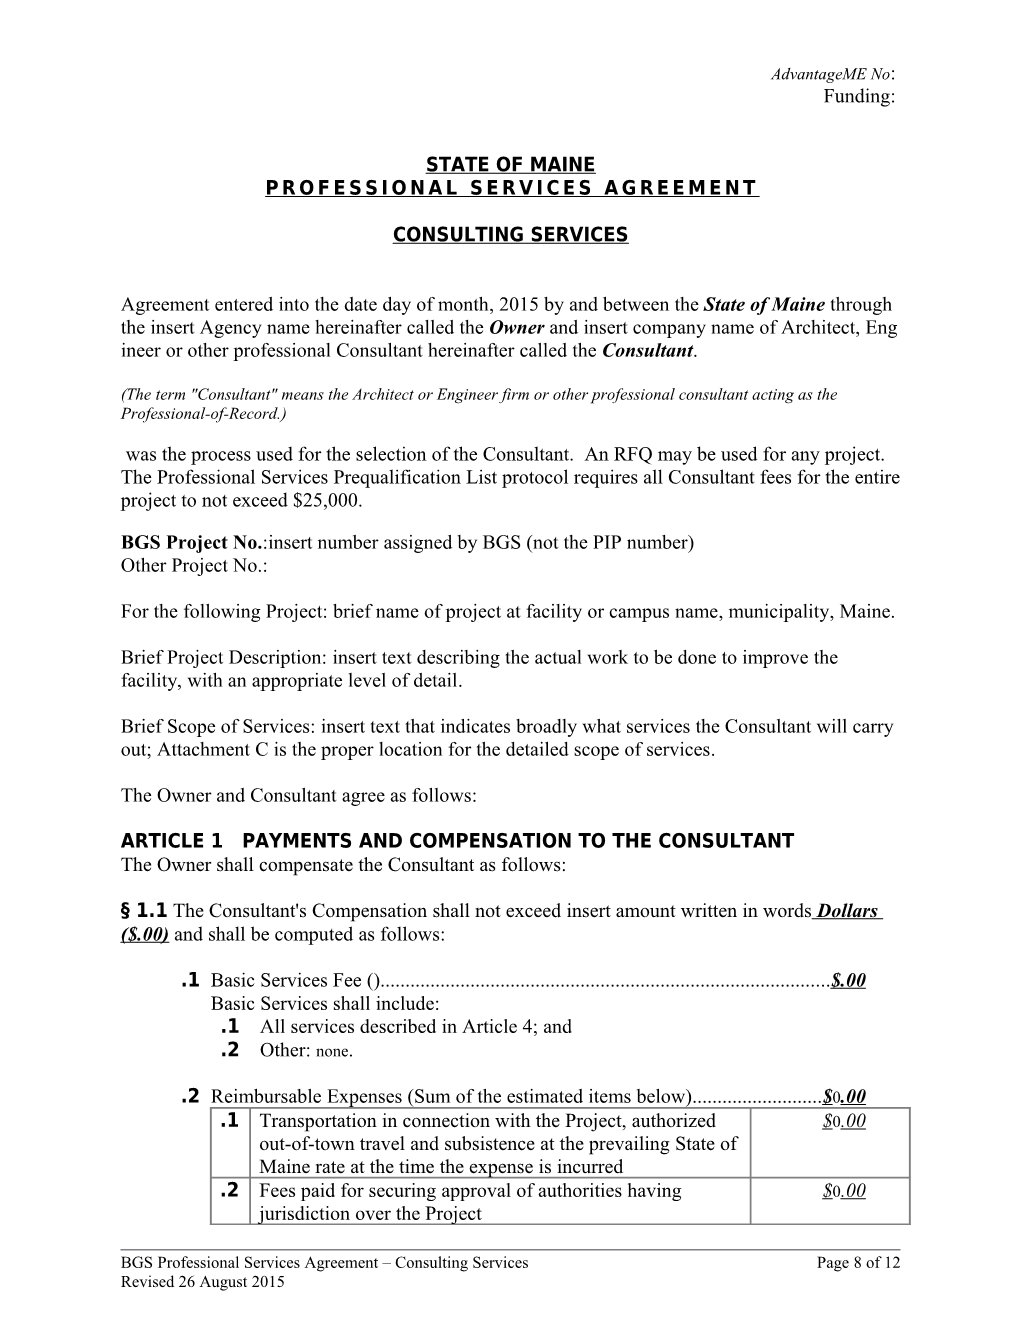 Professional Services Agreement s9